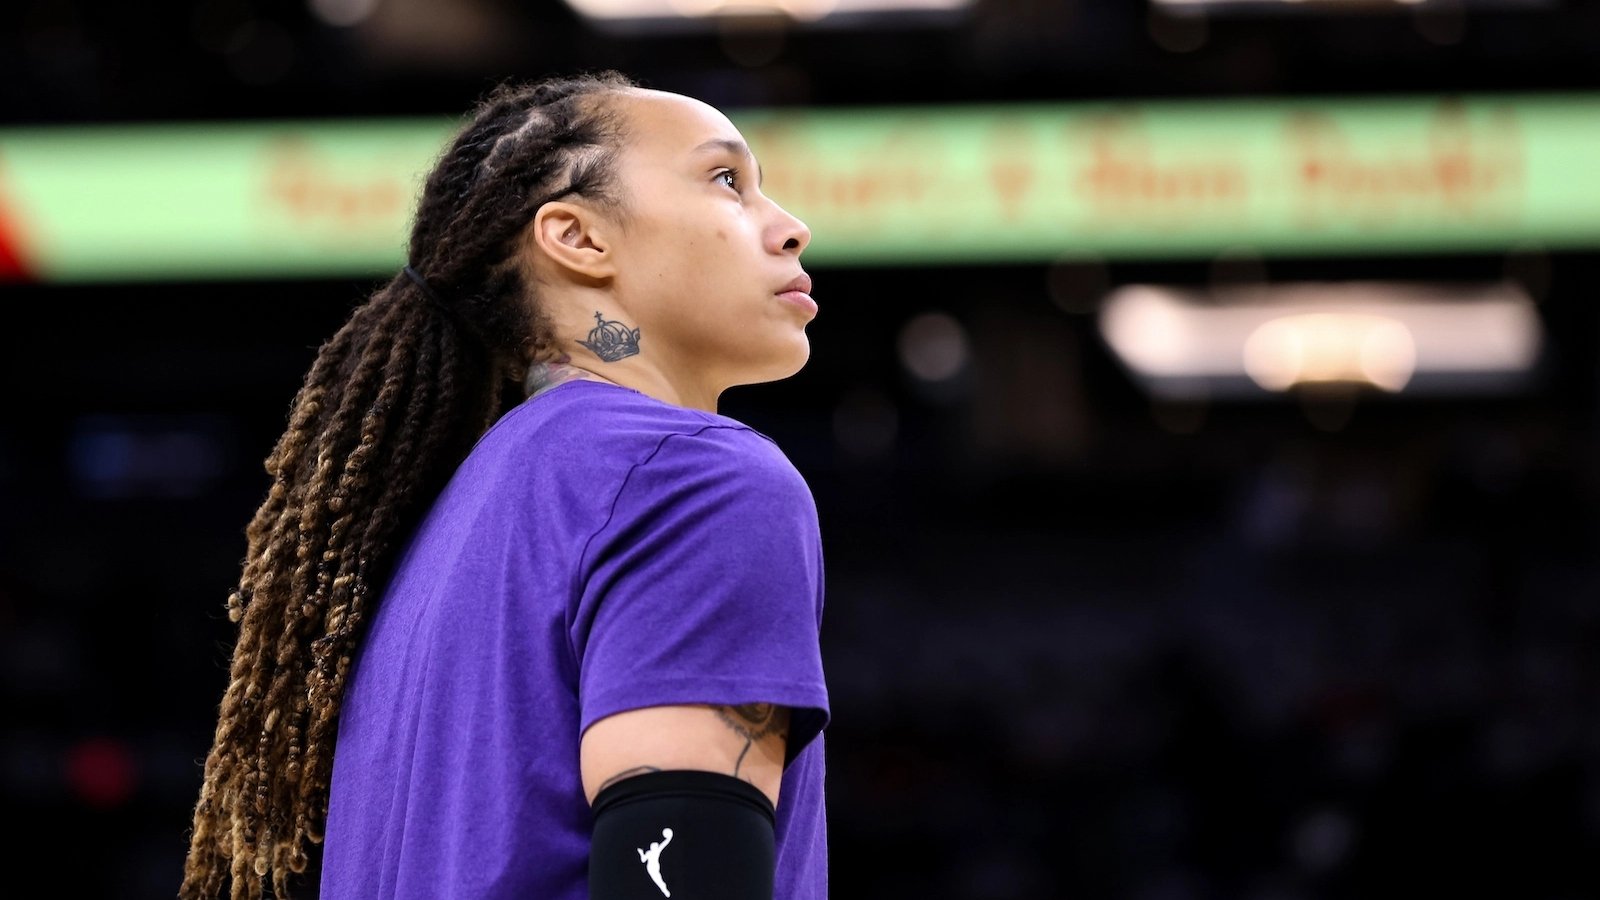 WNBA star Brittney Griner featured in Phoenix Mercury hype video while  detained in Russia  Fox News